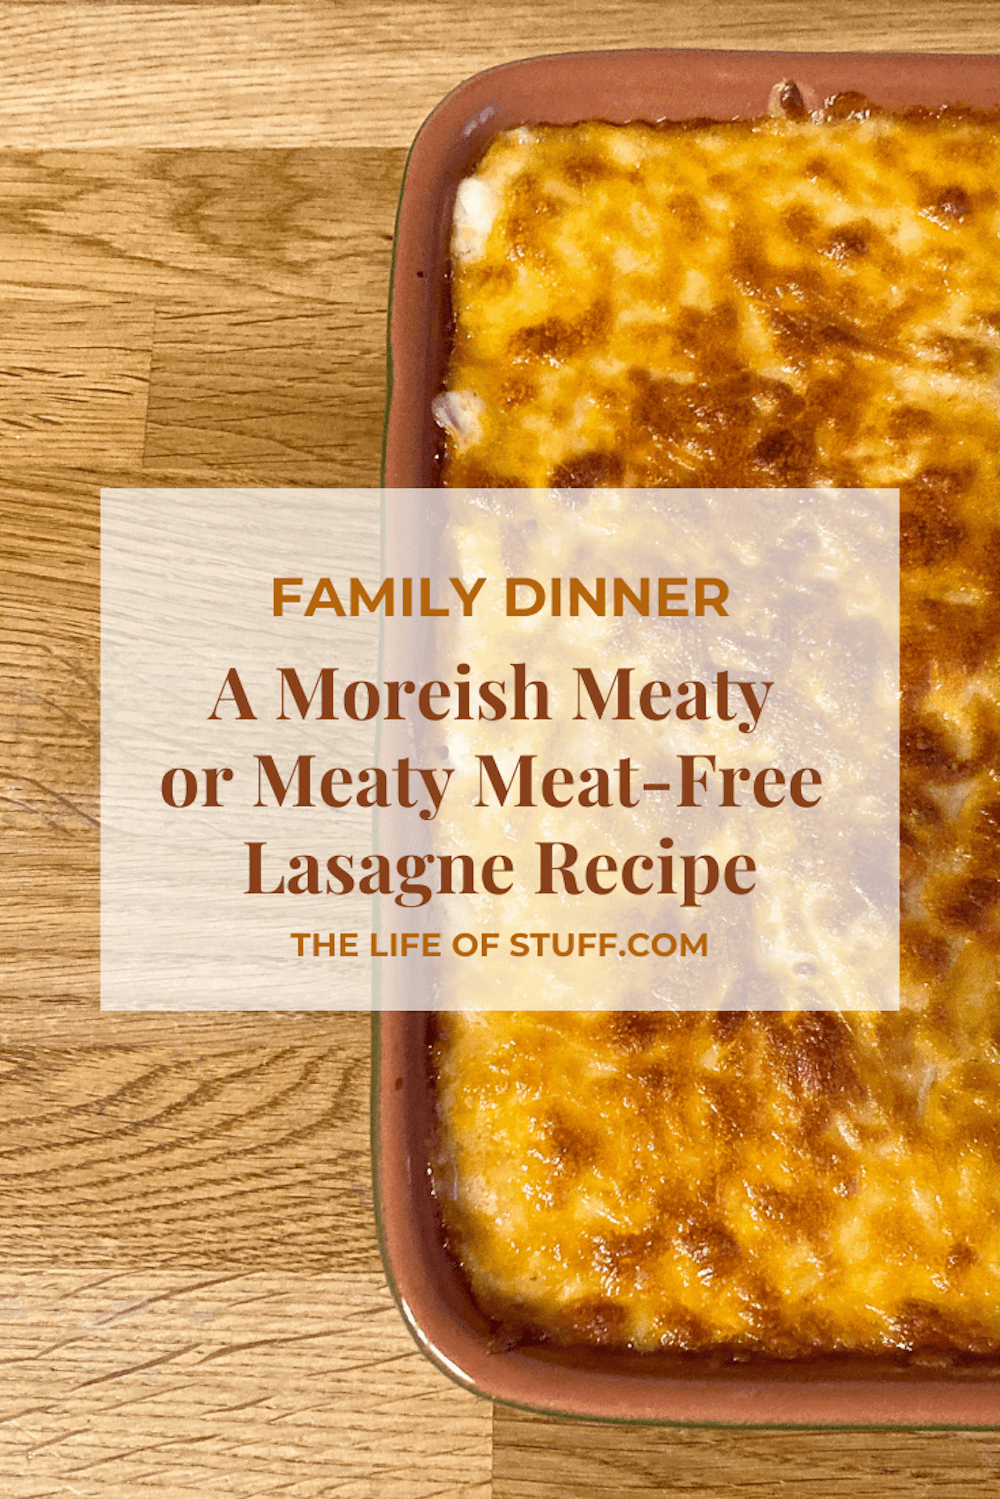 A Moreish Meaty or Meaty Meat-Free Lasagne Recipe - The Life of Stuff